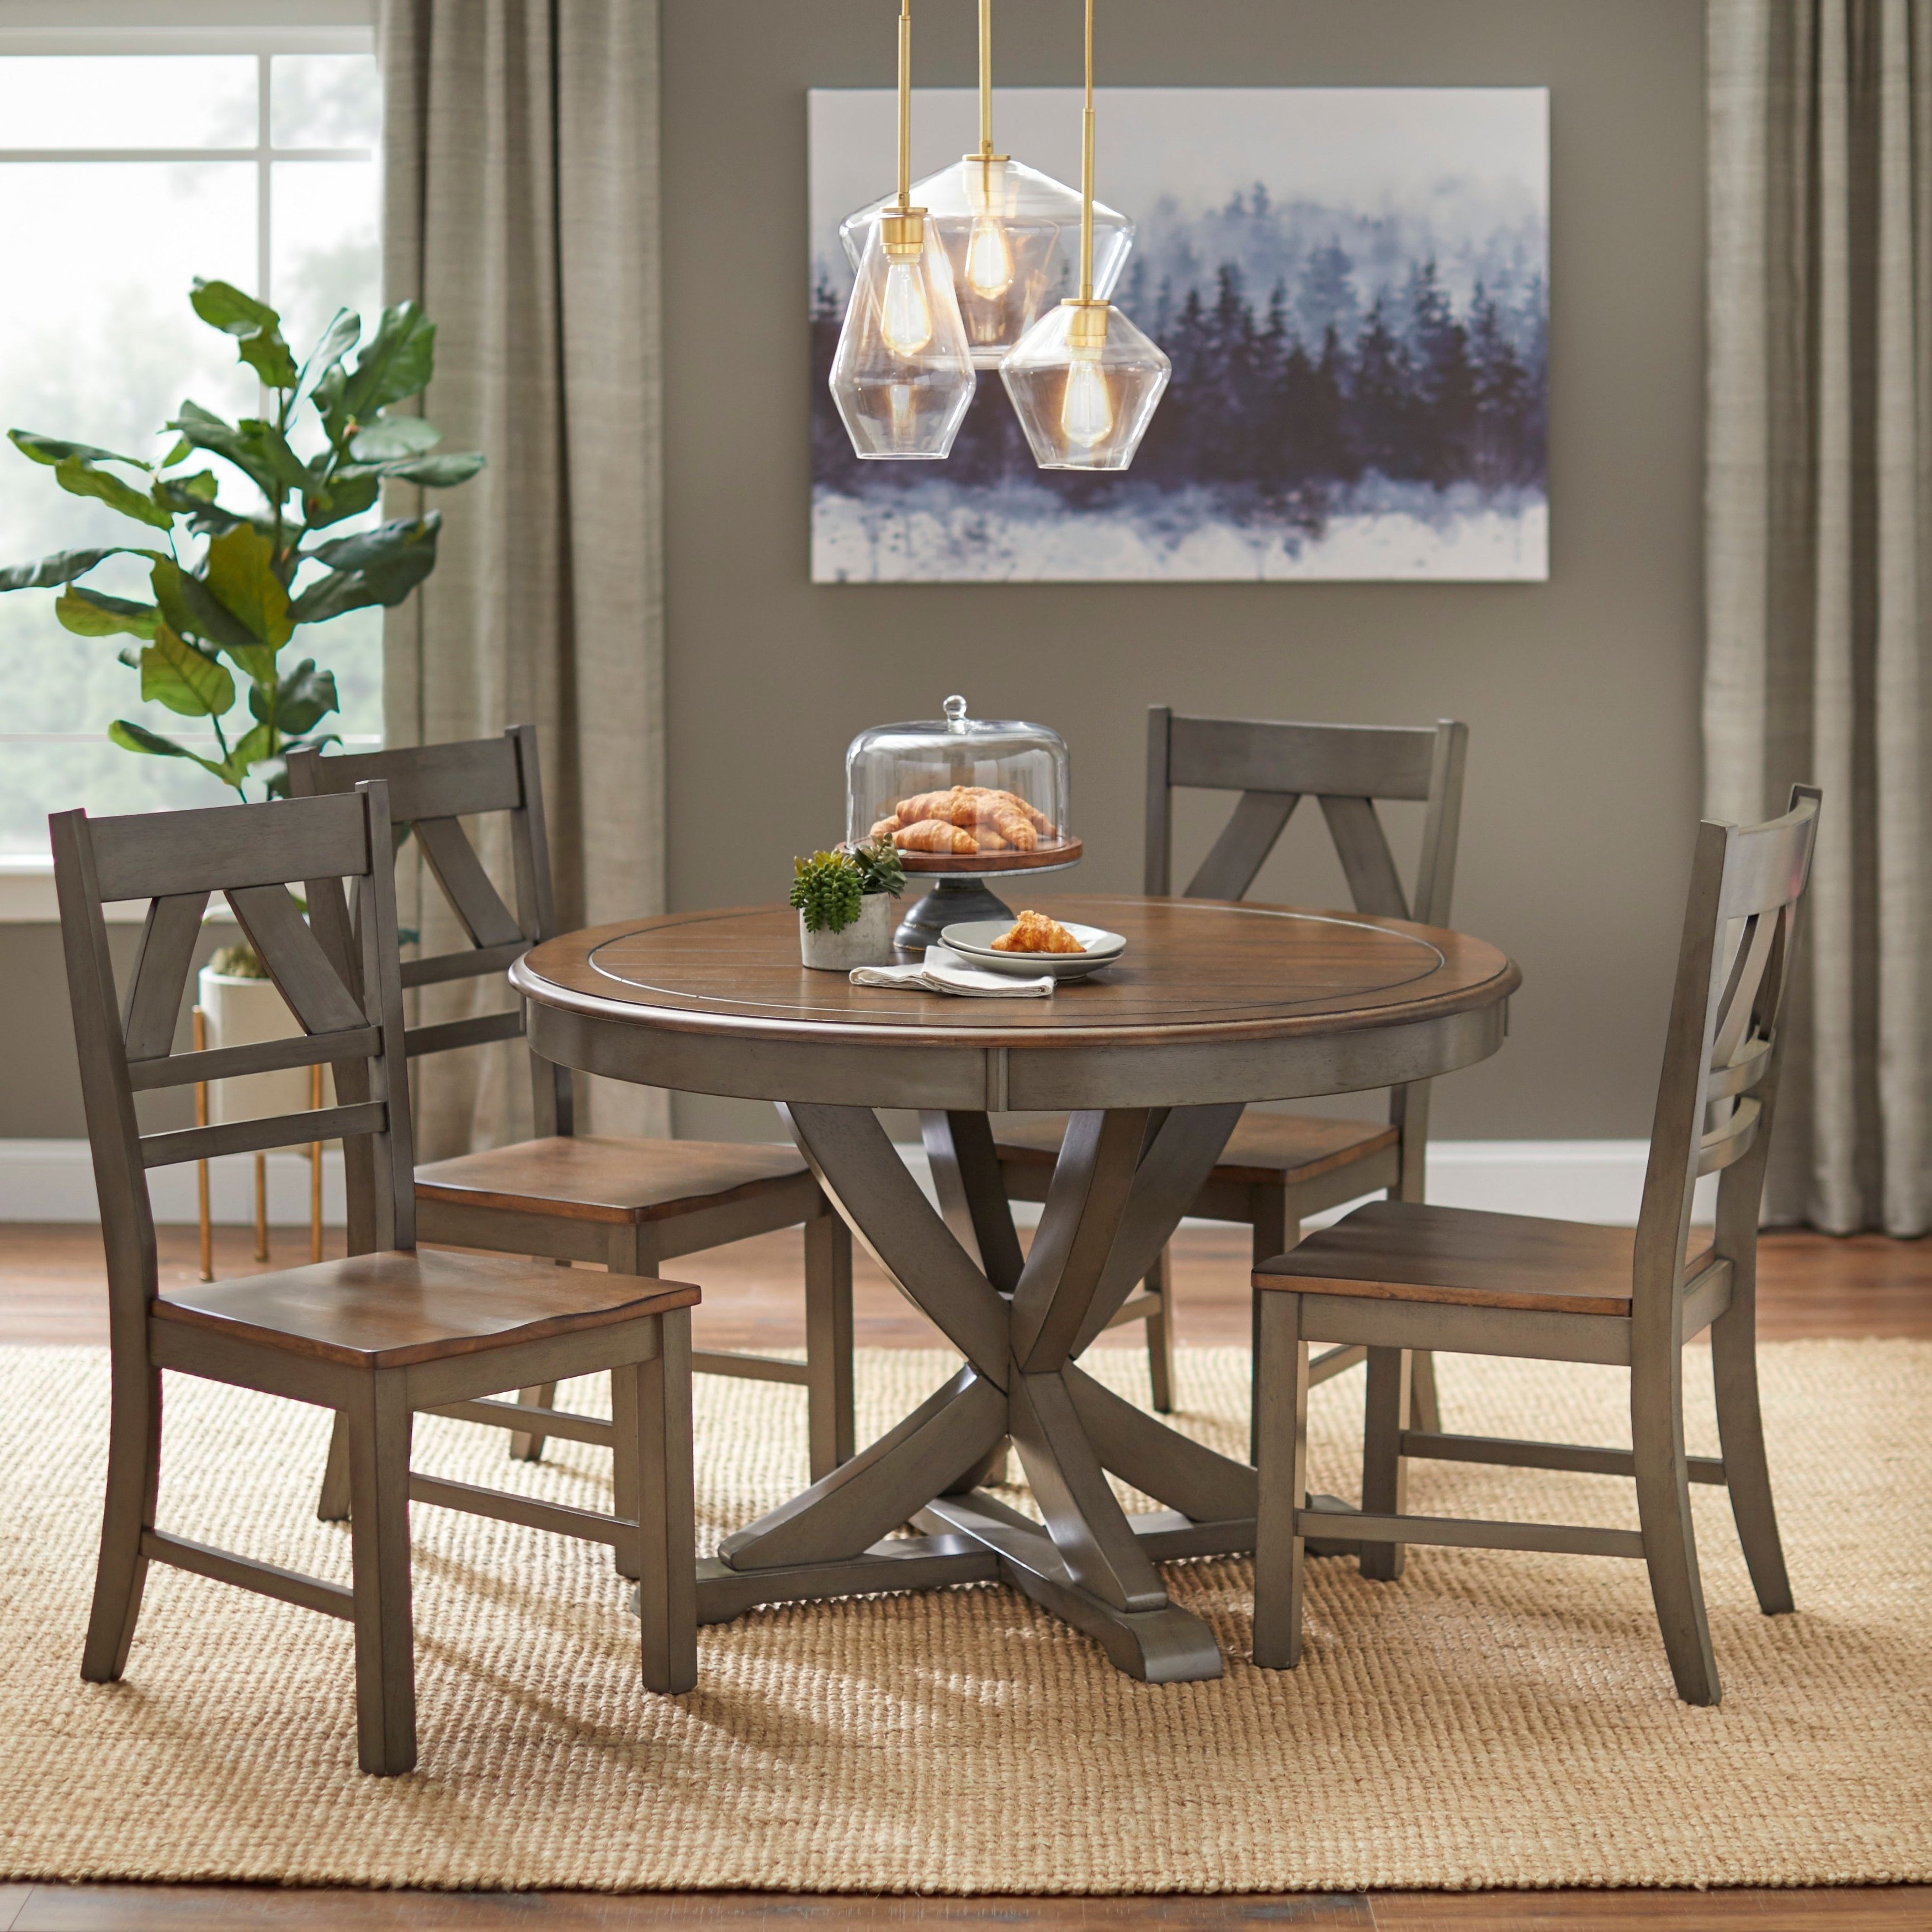 Preferred Falmer 3 Piece Solid Wood Dining Sets With Regard To Buy Farmhouse Kitchen & Dining Room Sets Online At Overstock (View 11 of 20)